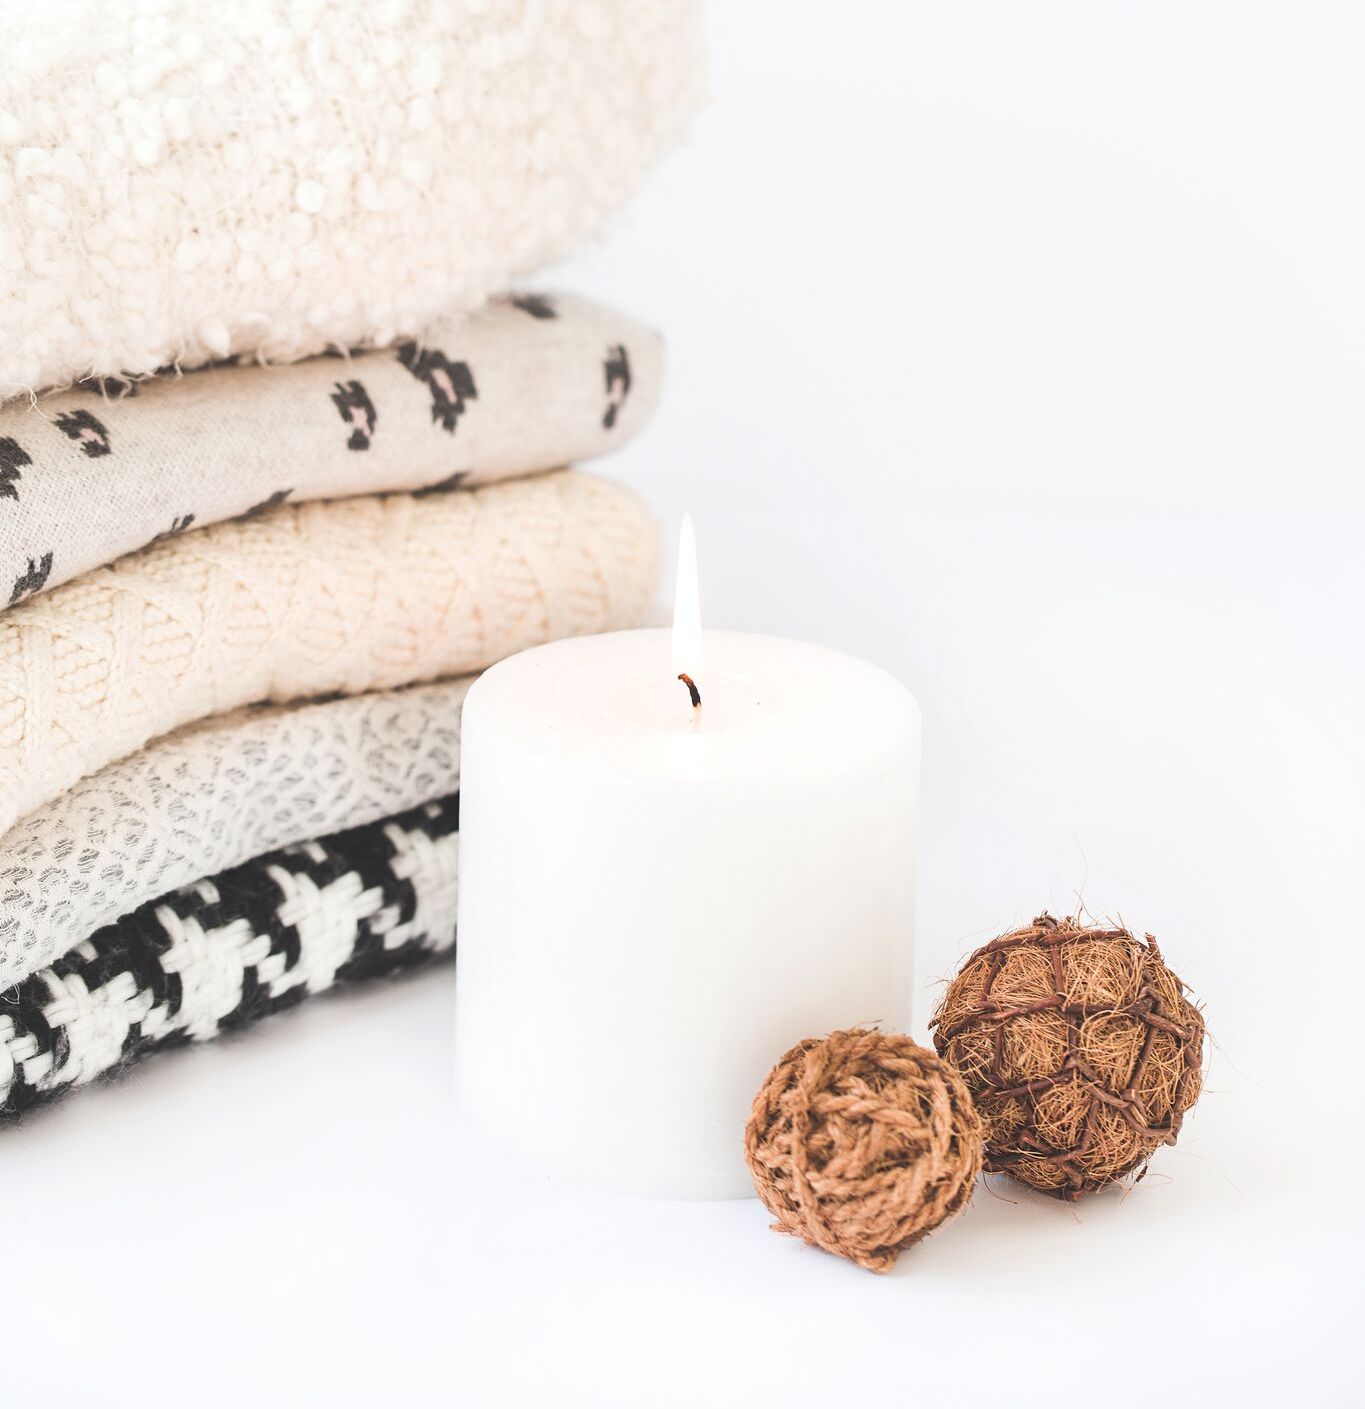 Have you heard about Hygge? Learn what it is and how to introduce it into your home